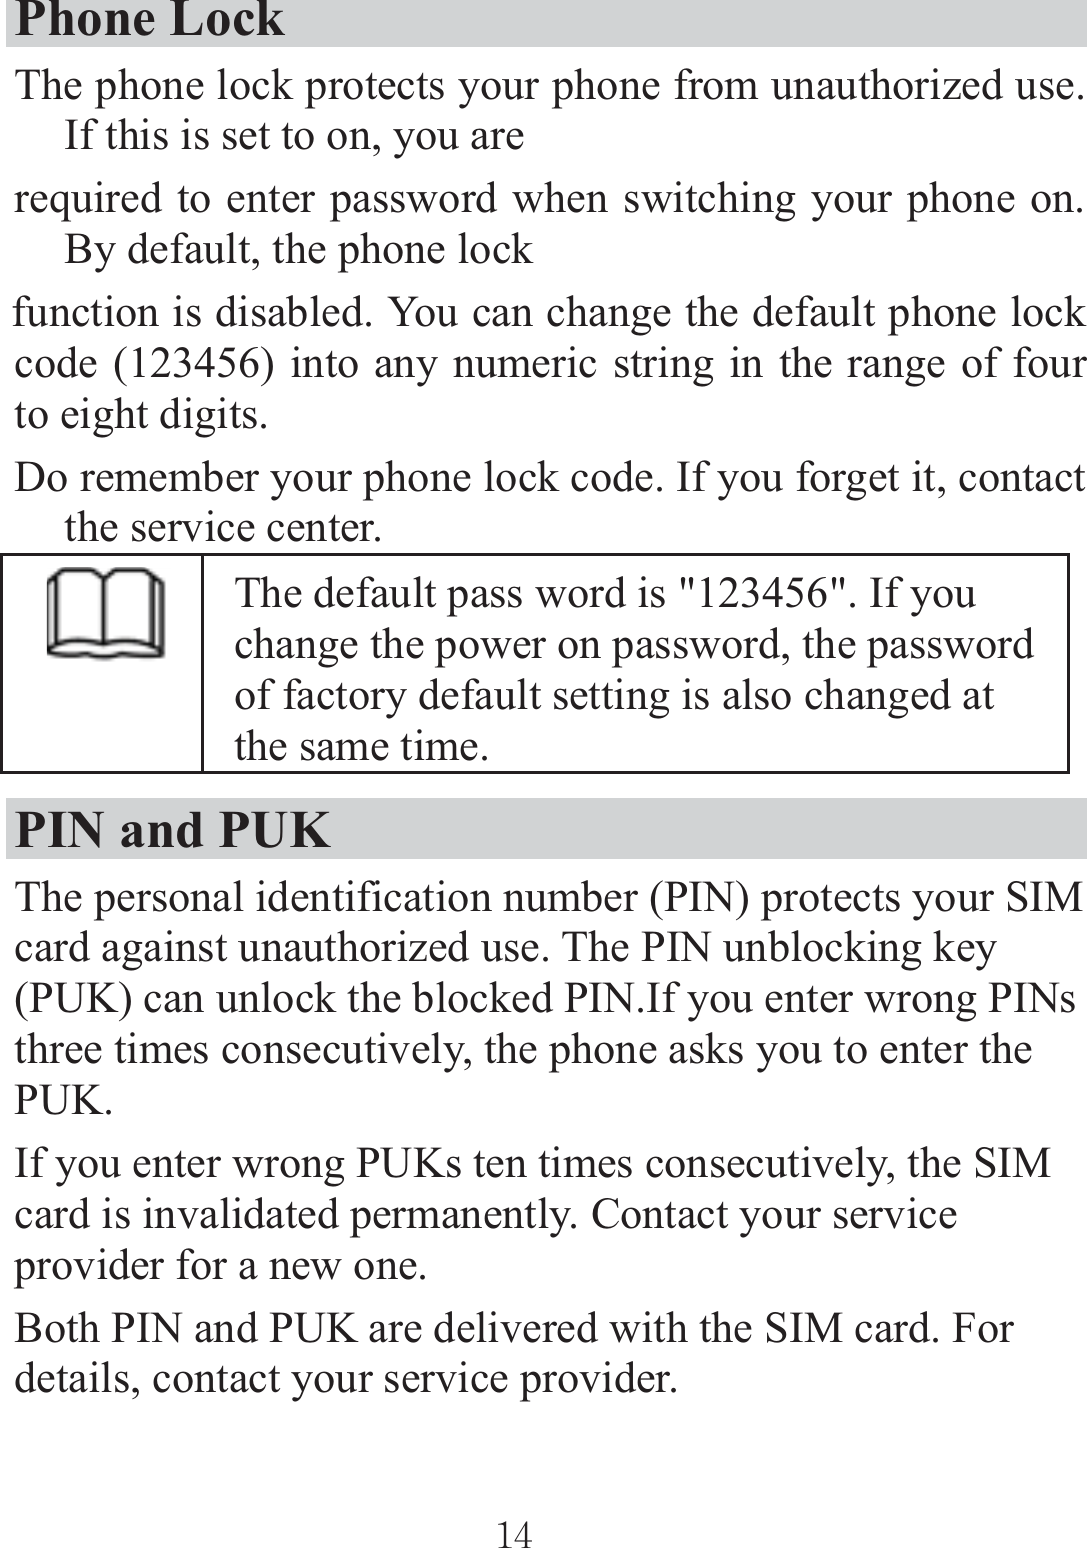 Phone Lock The phone lock protects your phone from unauthorized use. If this is set to on, you are required to enter password when switching your phone on. By default, the phone lock function is disabled. You can change the default phone lock code (123456) into any numeric string in the range of four to eight digits. Do remember your phone lock code. If you forget it, contact the service center. The default pass word is &quot;123456&quot;. If you change the power on password, the password of factory default setting is also changed at the same time. PIN and PUK   The personal identification number (PIN) protects your SIM card against unauthorized use. The PIN unblocking key (PUK) can unlock the blocked PIN.If you enter wrong PINs three times consecutively, the phone asks you to enter the PUK. If you enter wrong PUKs ten times consecutively, the SIM card is invalidated permanently. Contact your service provider for a new one. Both PIN and PUK are delivered with the SIM card. For details, contact your service provider. ٻٻڌڏٻٻ